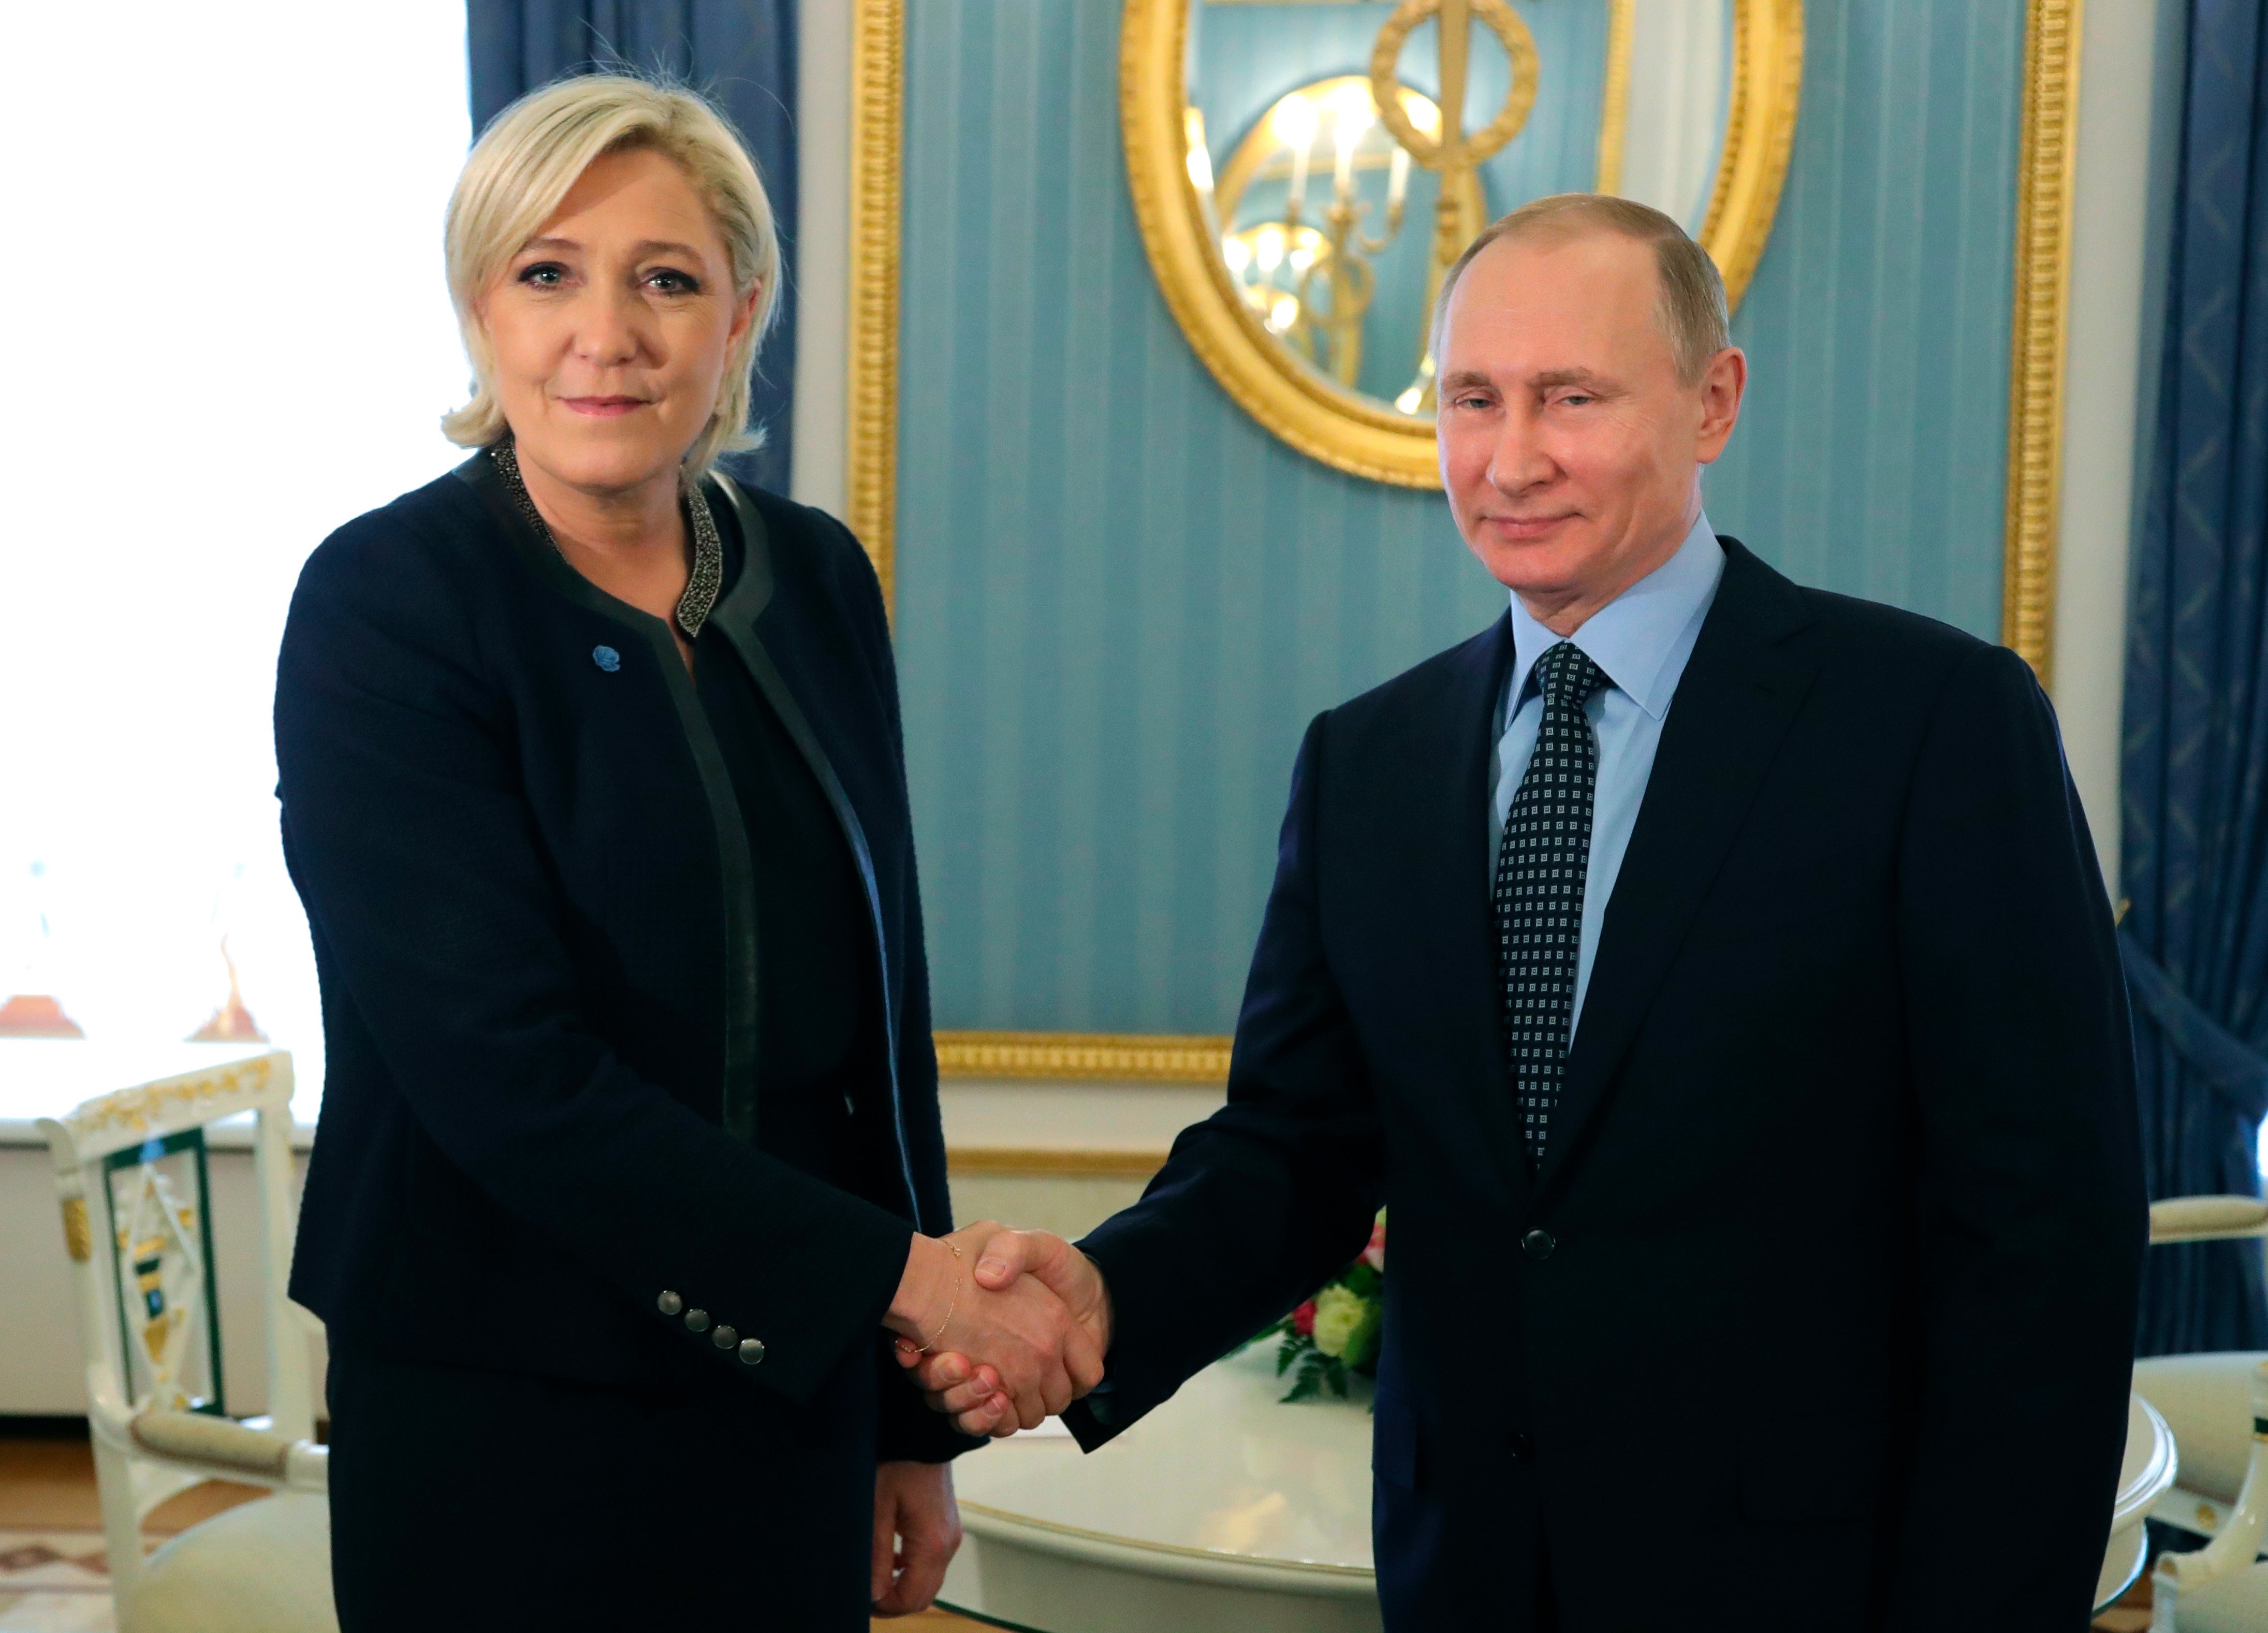 Meat and greet: Vladimir Putin with Marine Le Pen in the Kremlin in 2017